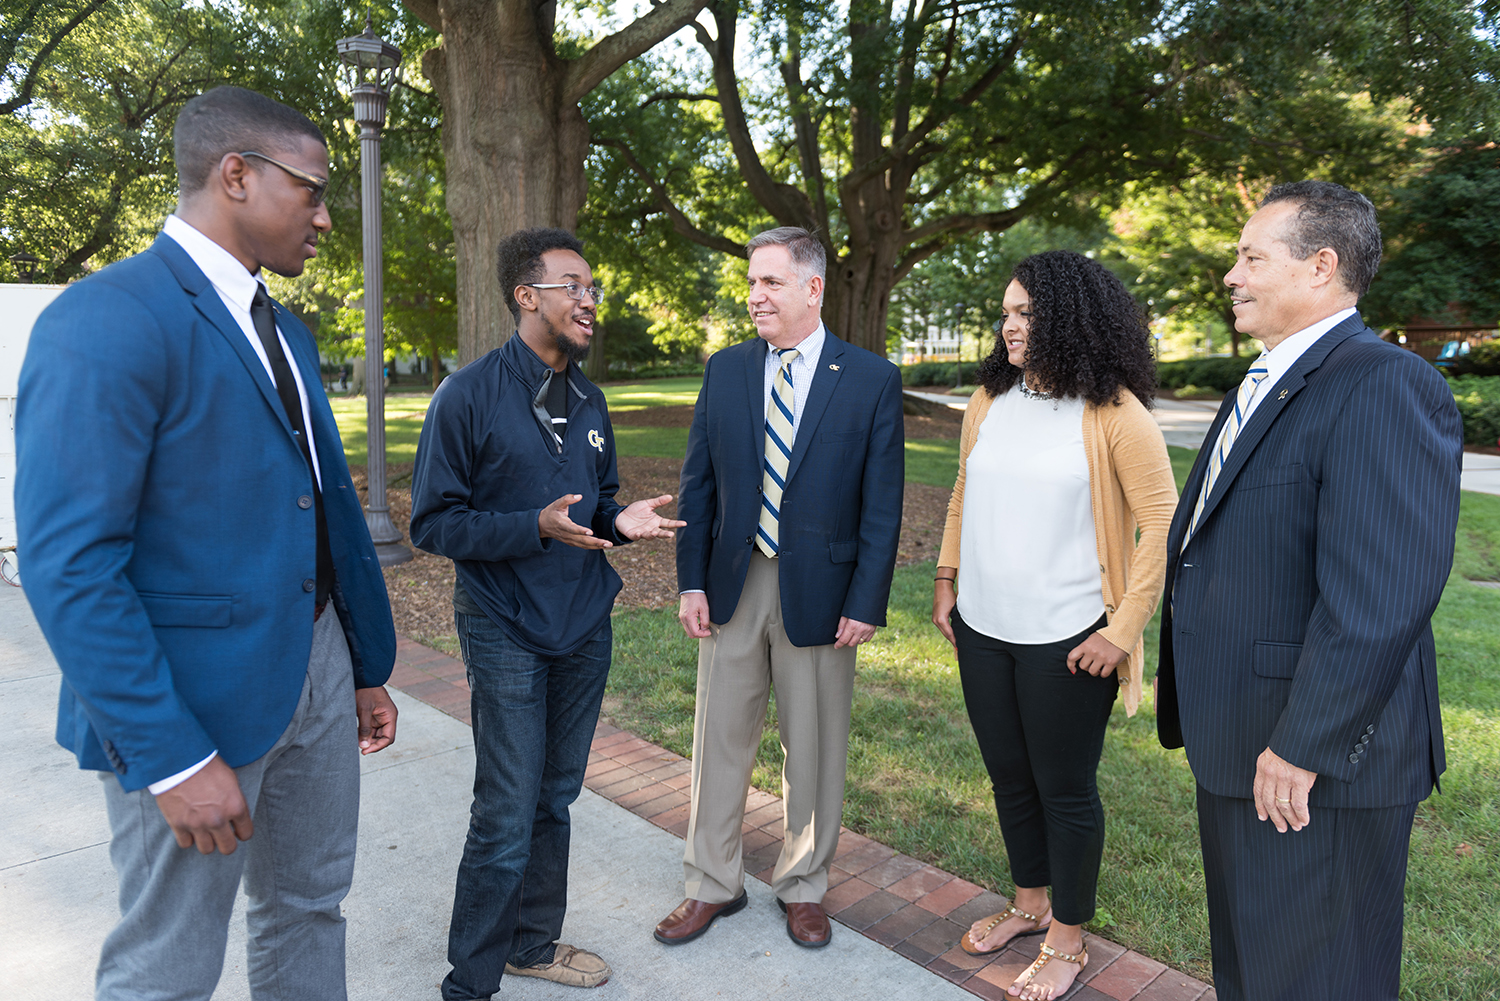 Co-chaired by Institute Diversity Vice President Archie Ervin and Student Life Vice President and Dean of Students John Stein, the Black Student Experience Task Force comprised 13 student, faculty, and staff members, including Morgan Foreman, Henderson Johnson II, and Nelson Raphael (shown)